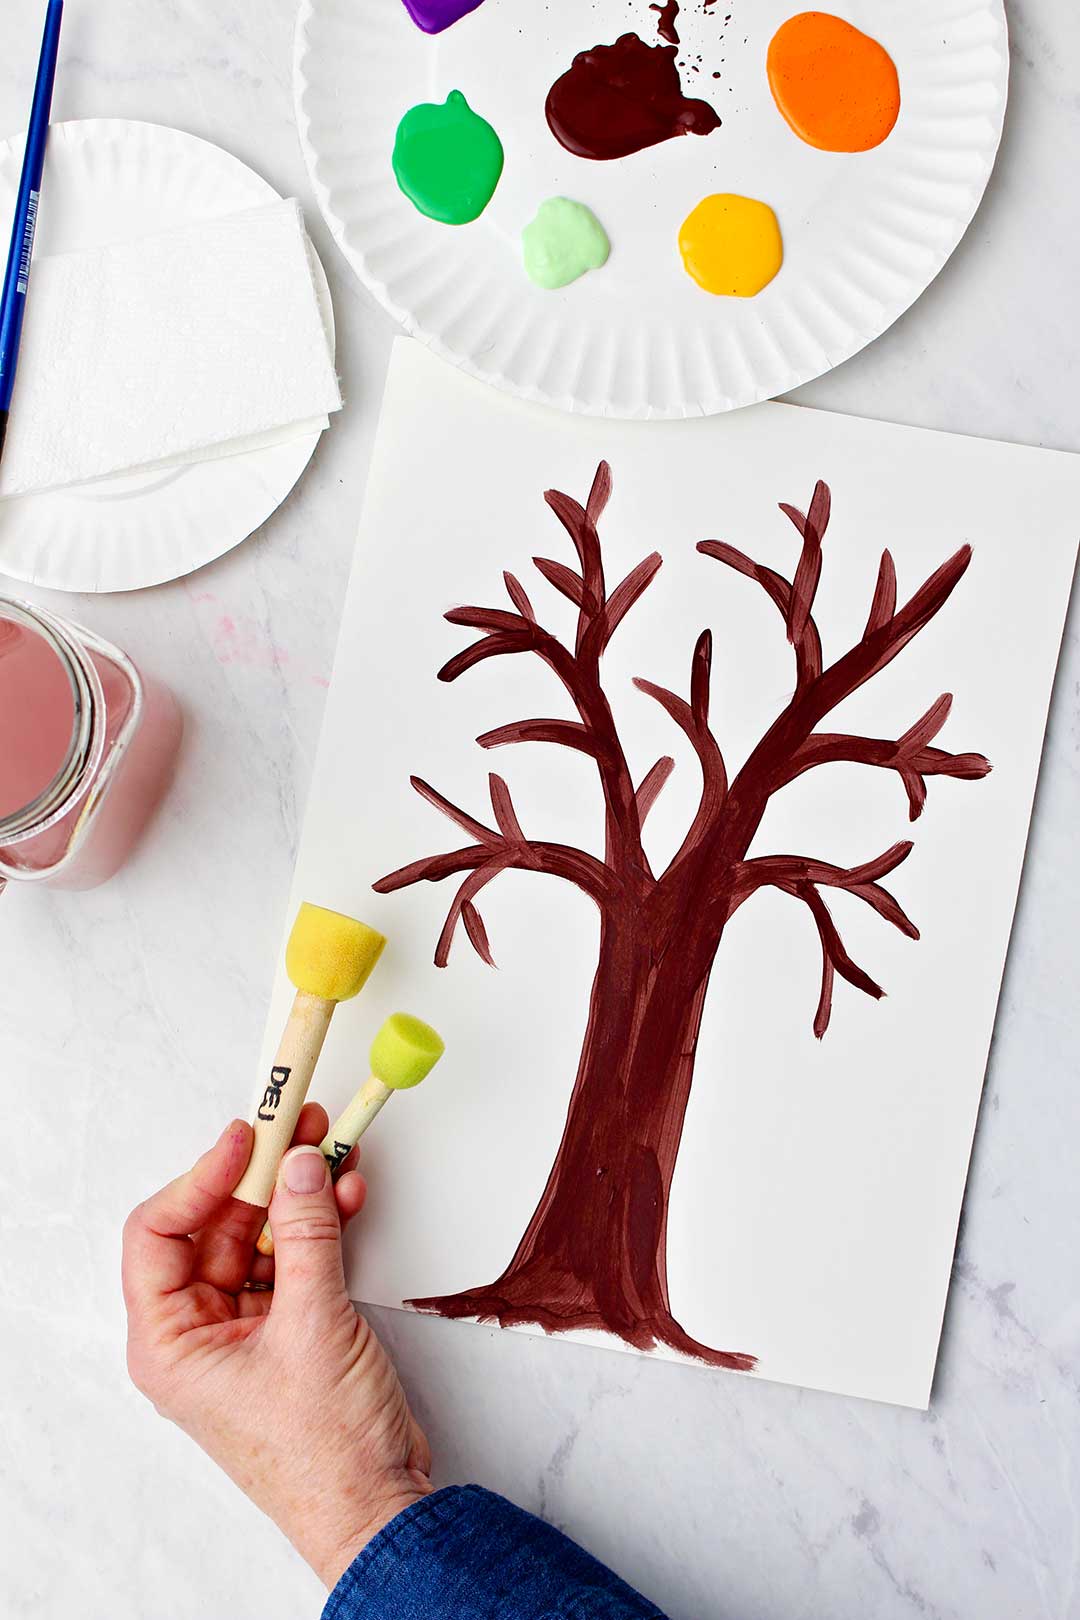 Painting Trees With A Fan Brush - Step By Step Acrylic Painting  Beginner  painting, Tree painting, Acrylic painting for beginners